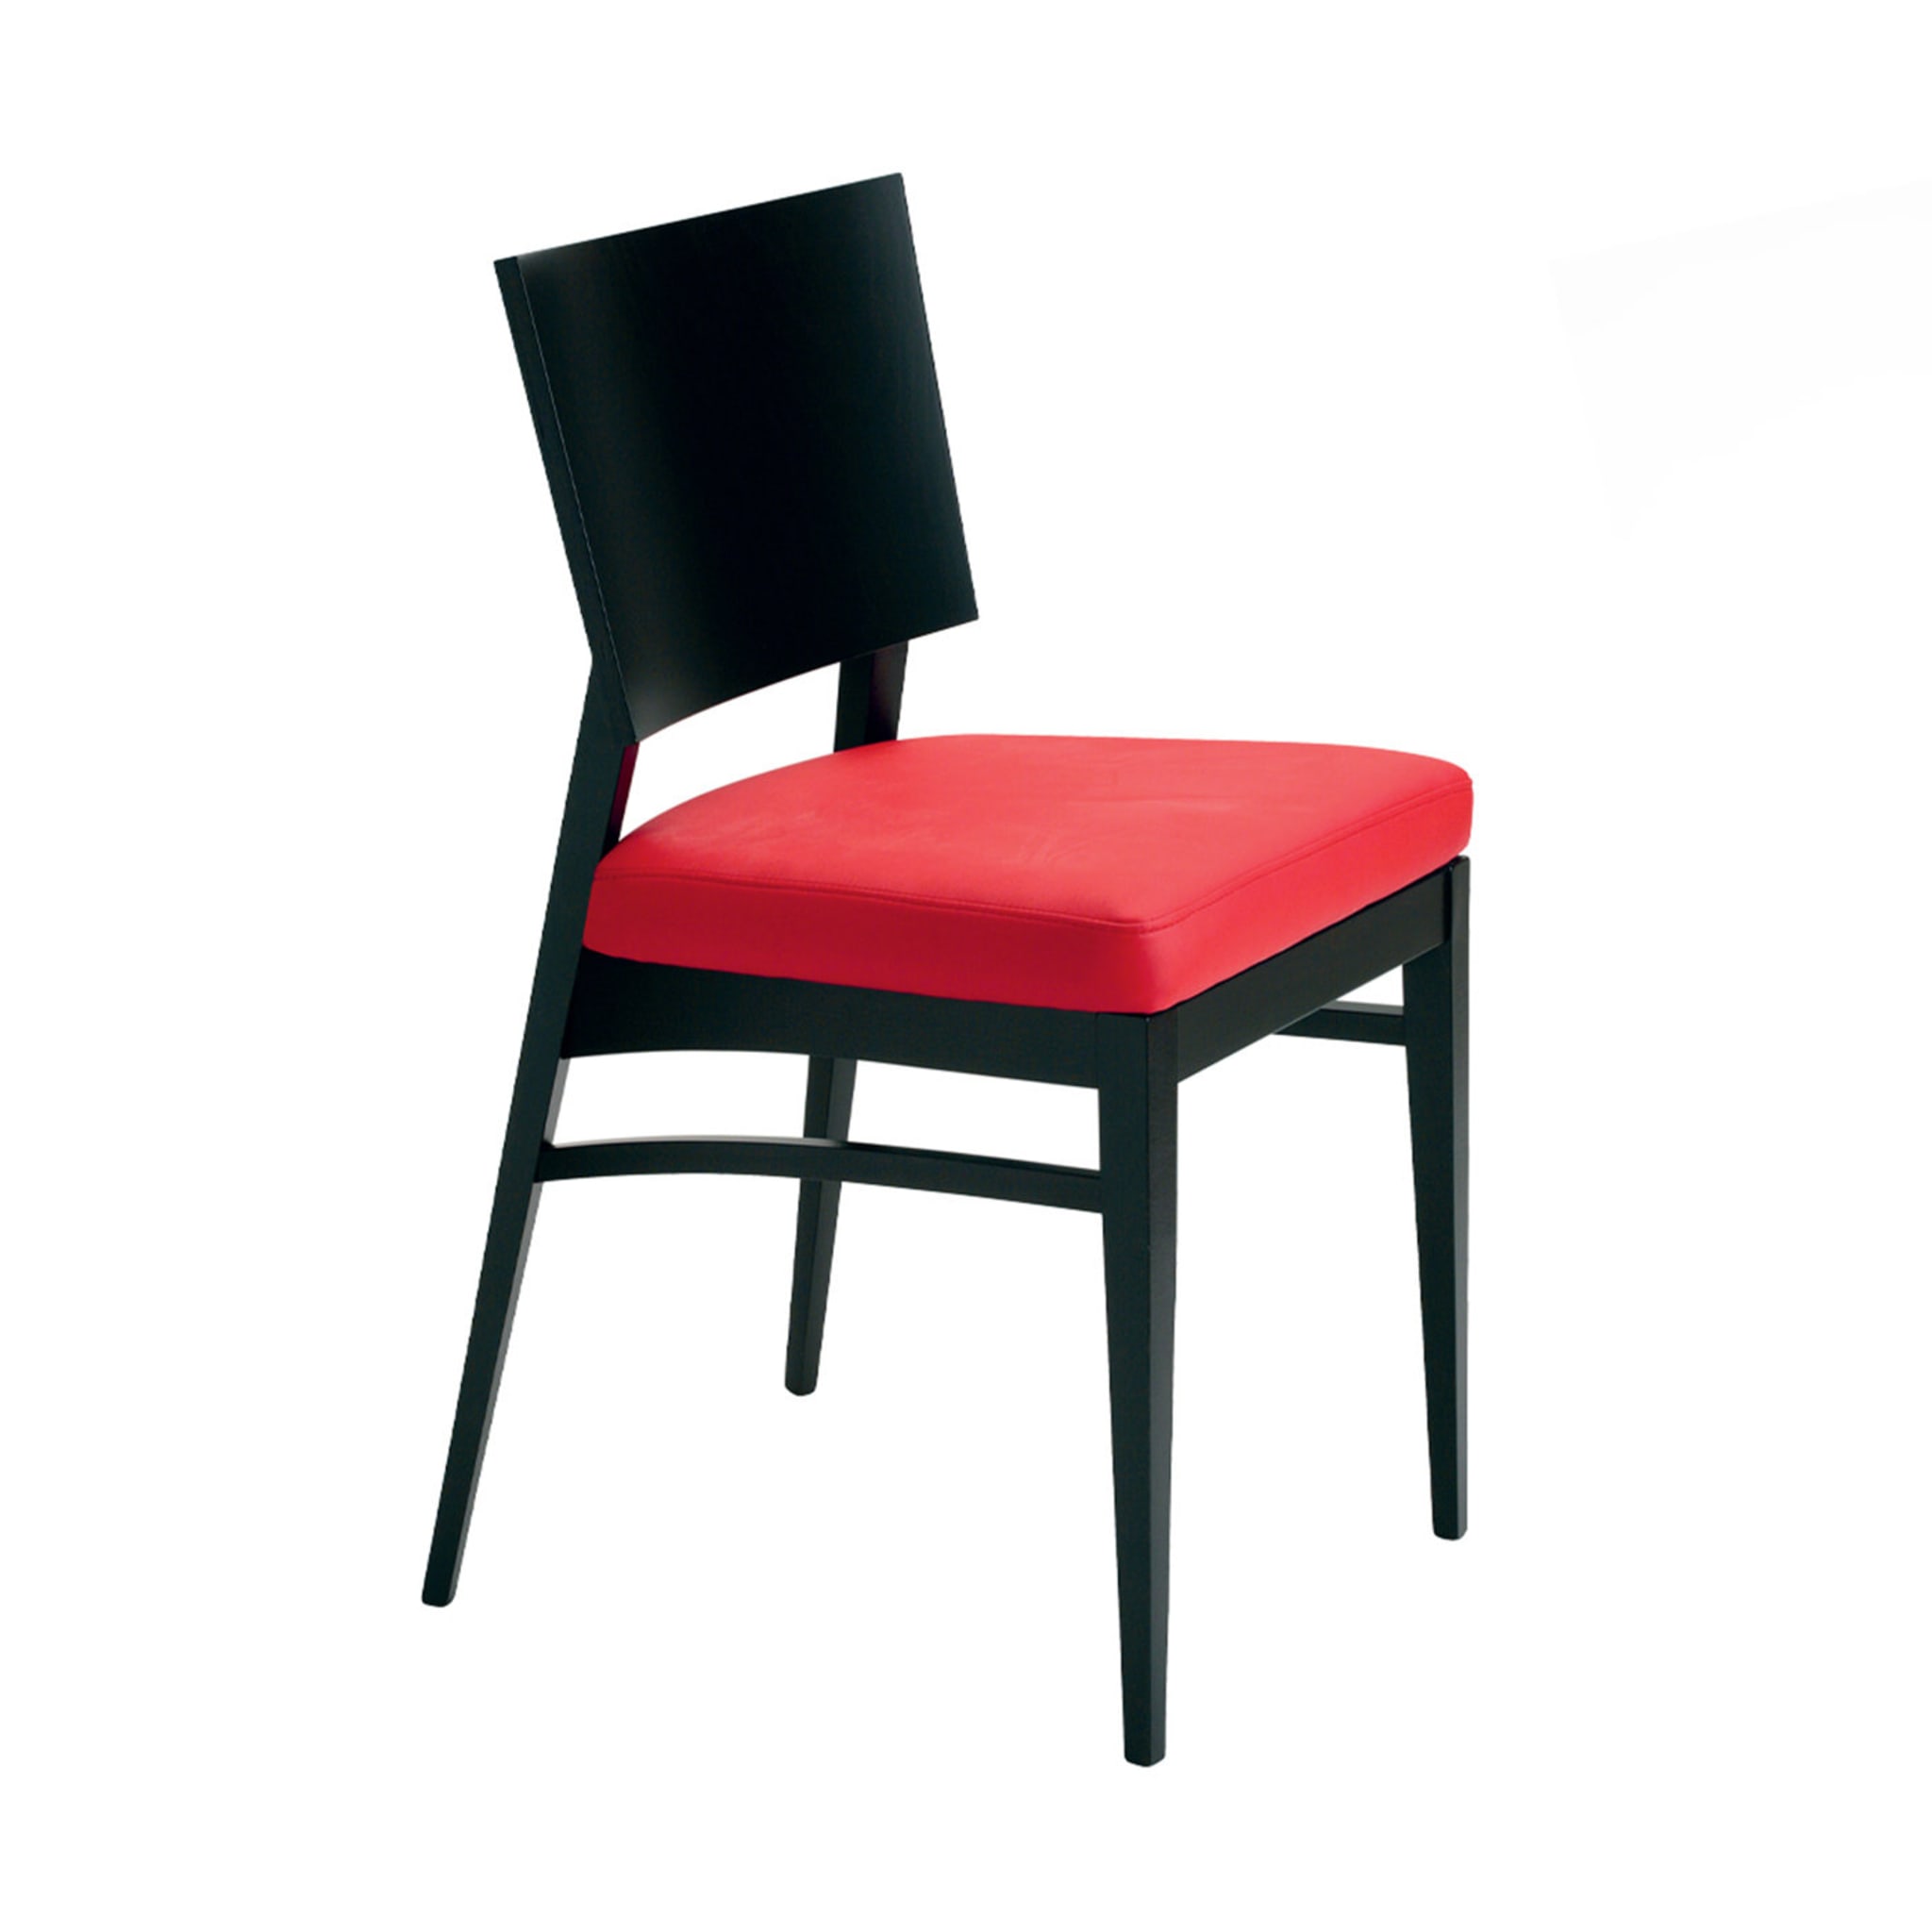 Crono Set of 2 Red and Black Chairs - Main view